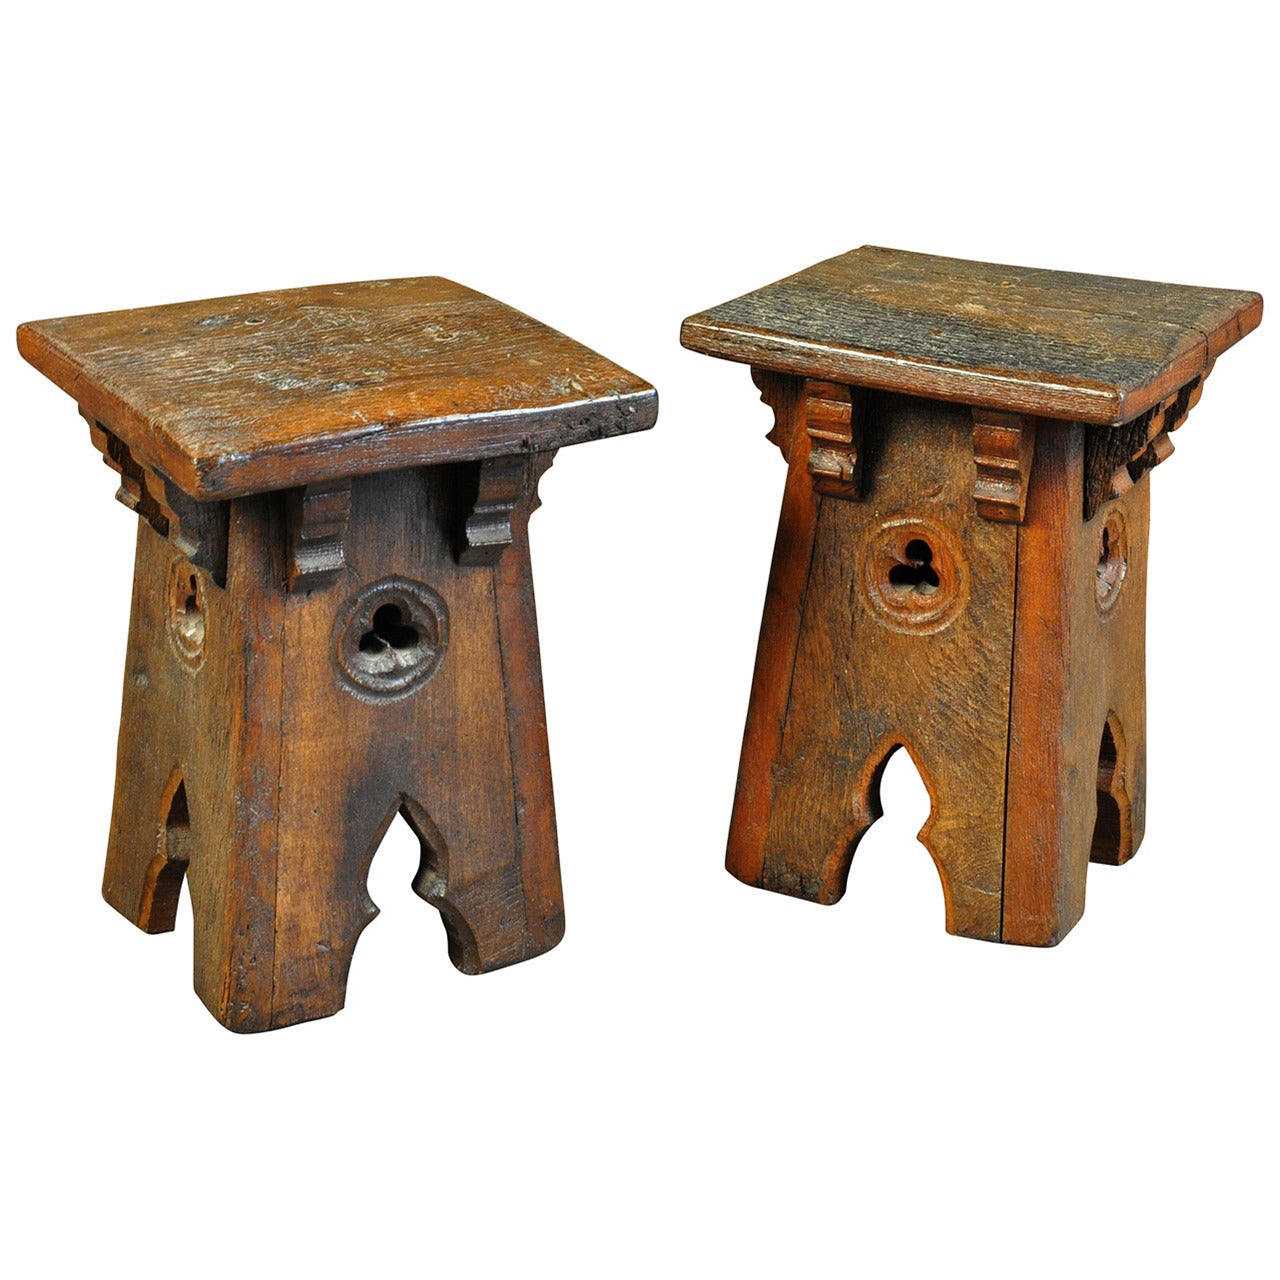 French Gothic Style Stools in Oak